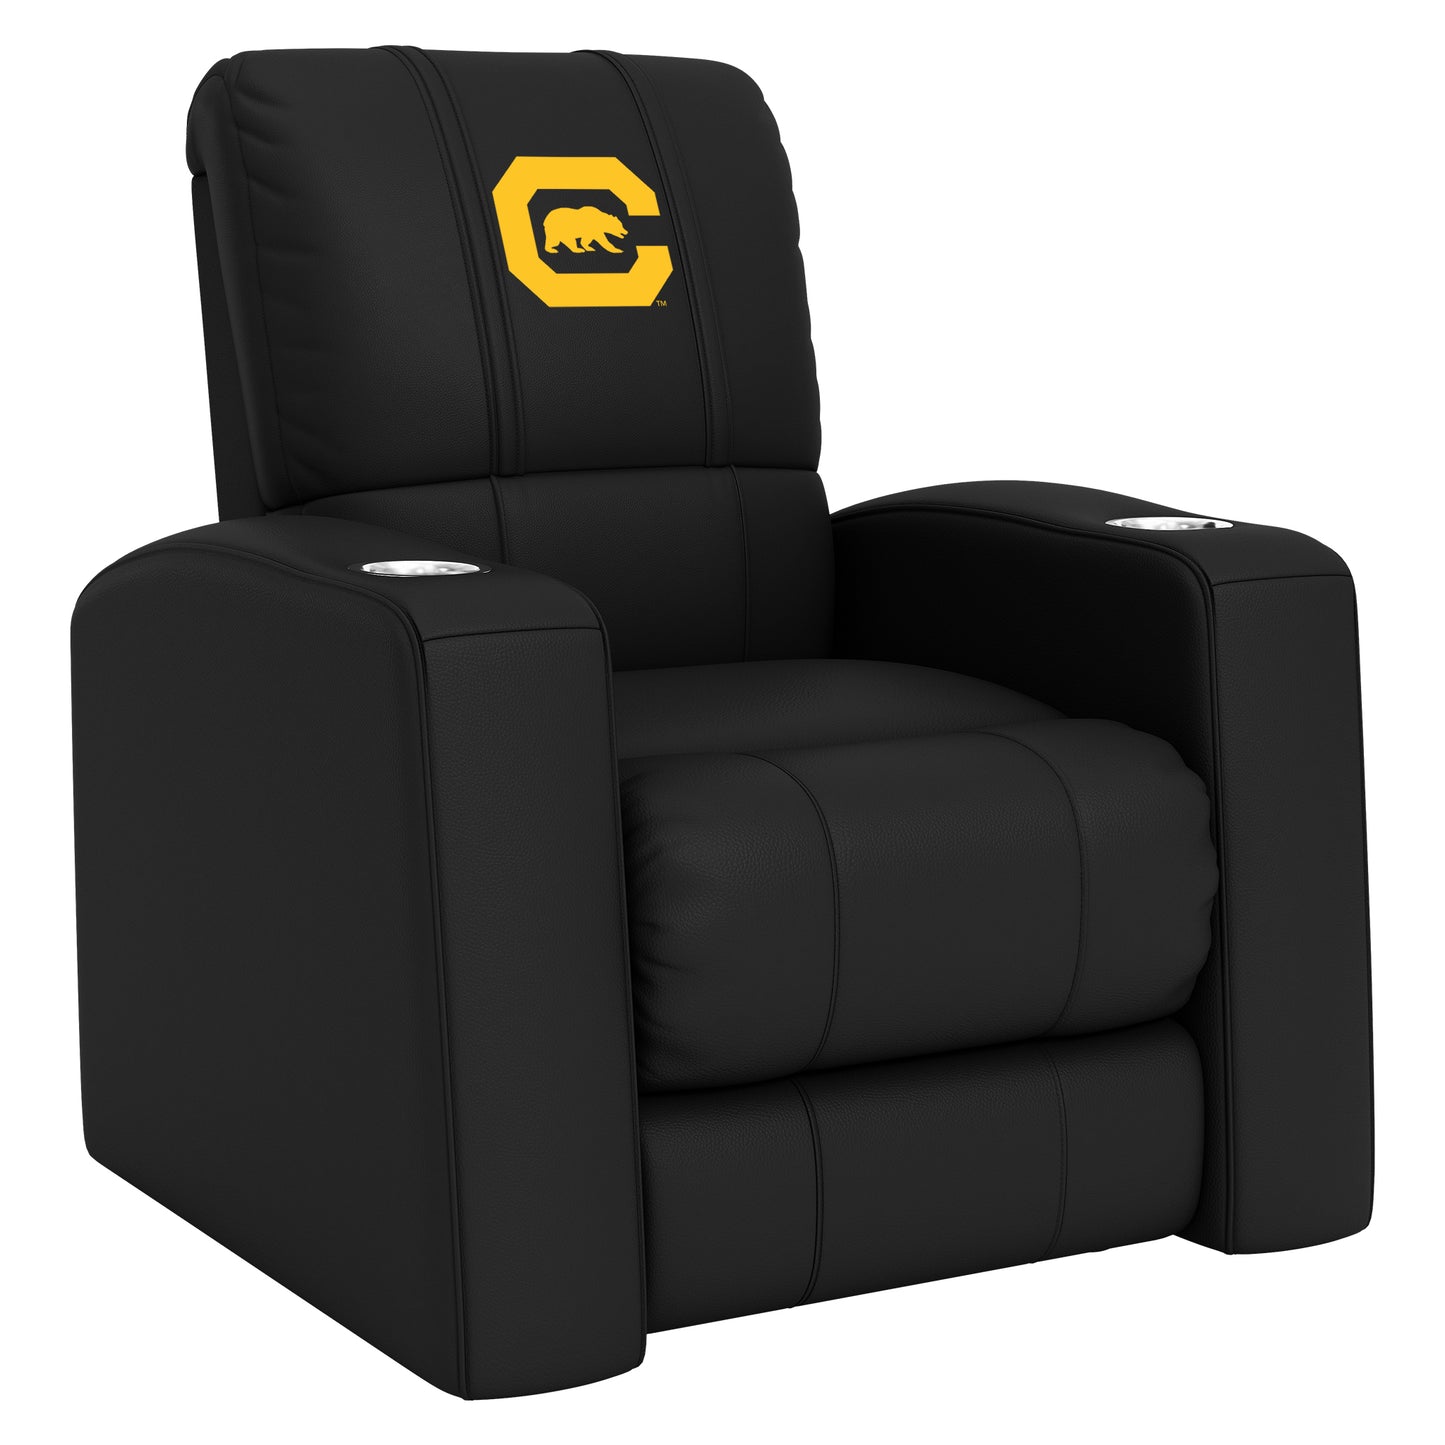 Relax Home Theater Recliner with California Golden Bears Secondary Logo